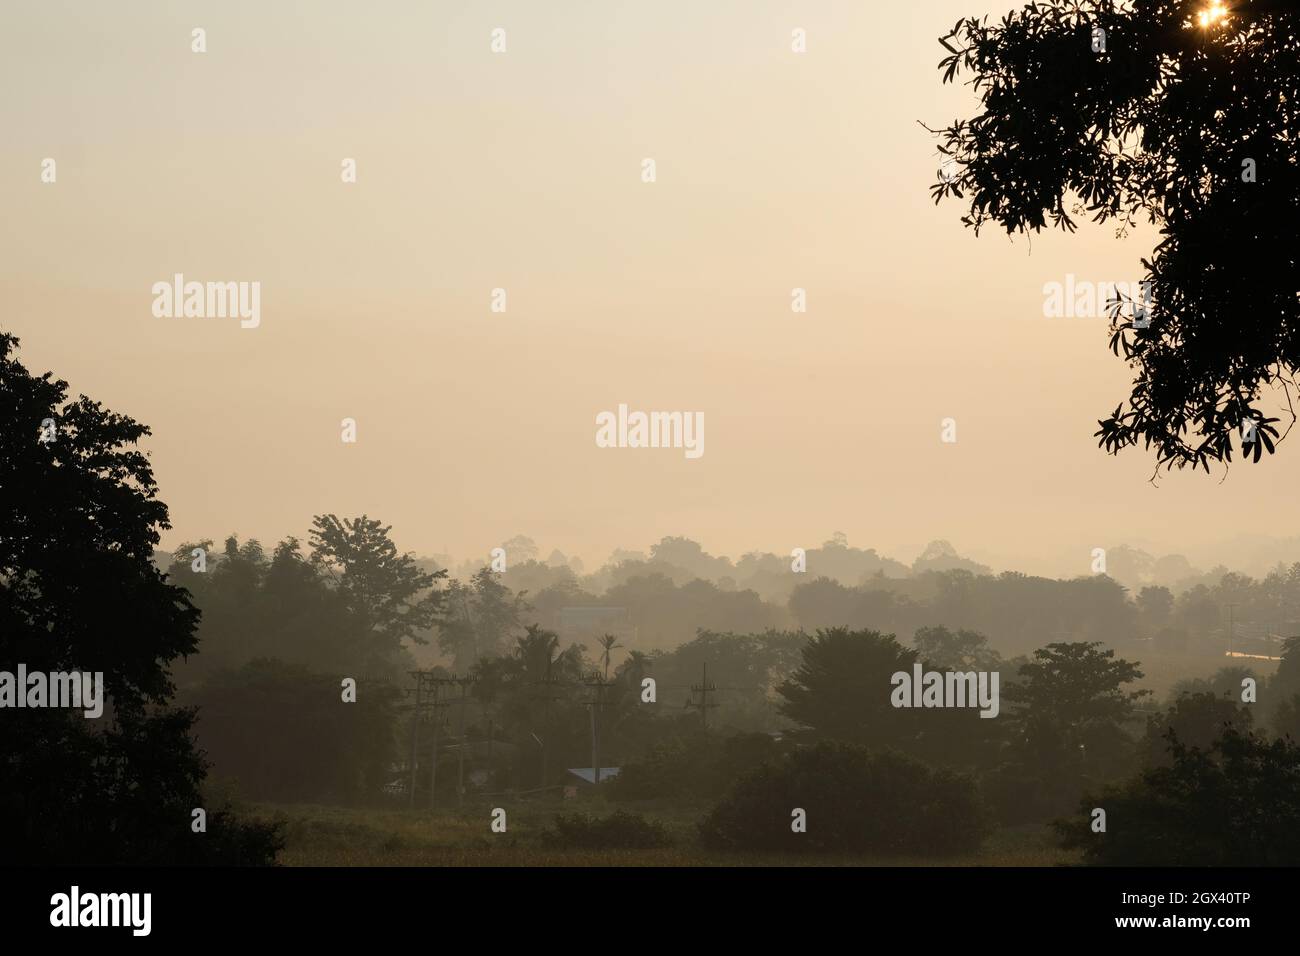 Silhouette Trees Against Sky At Dawn Stock Photo